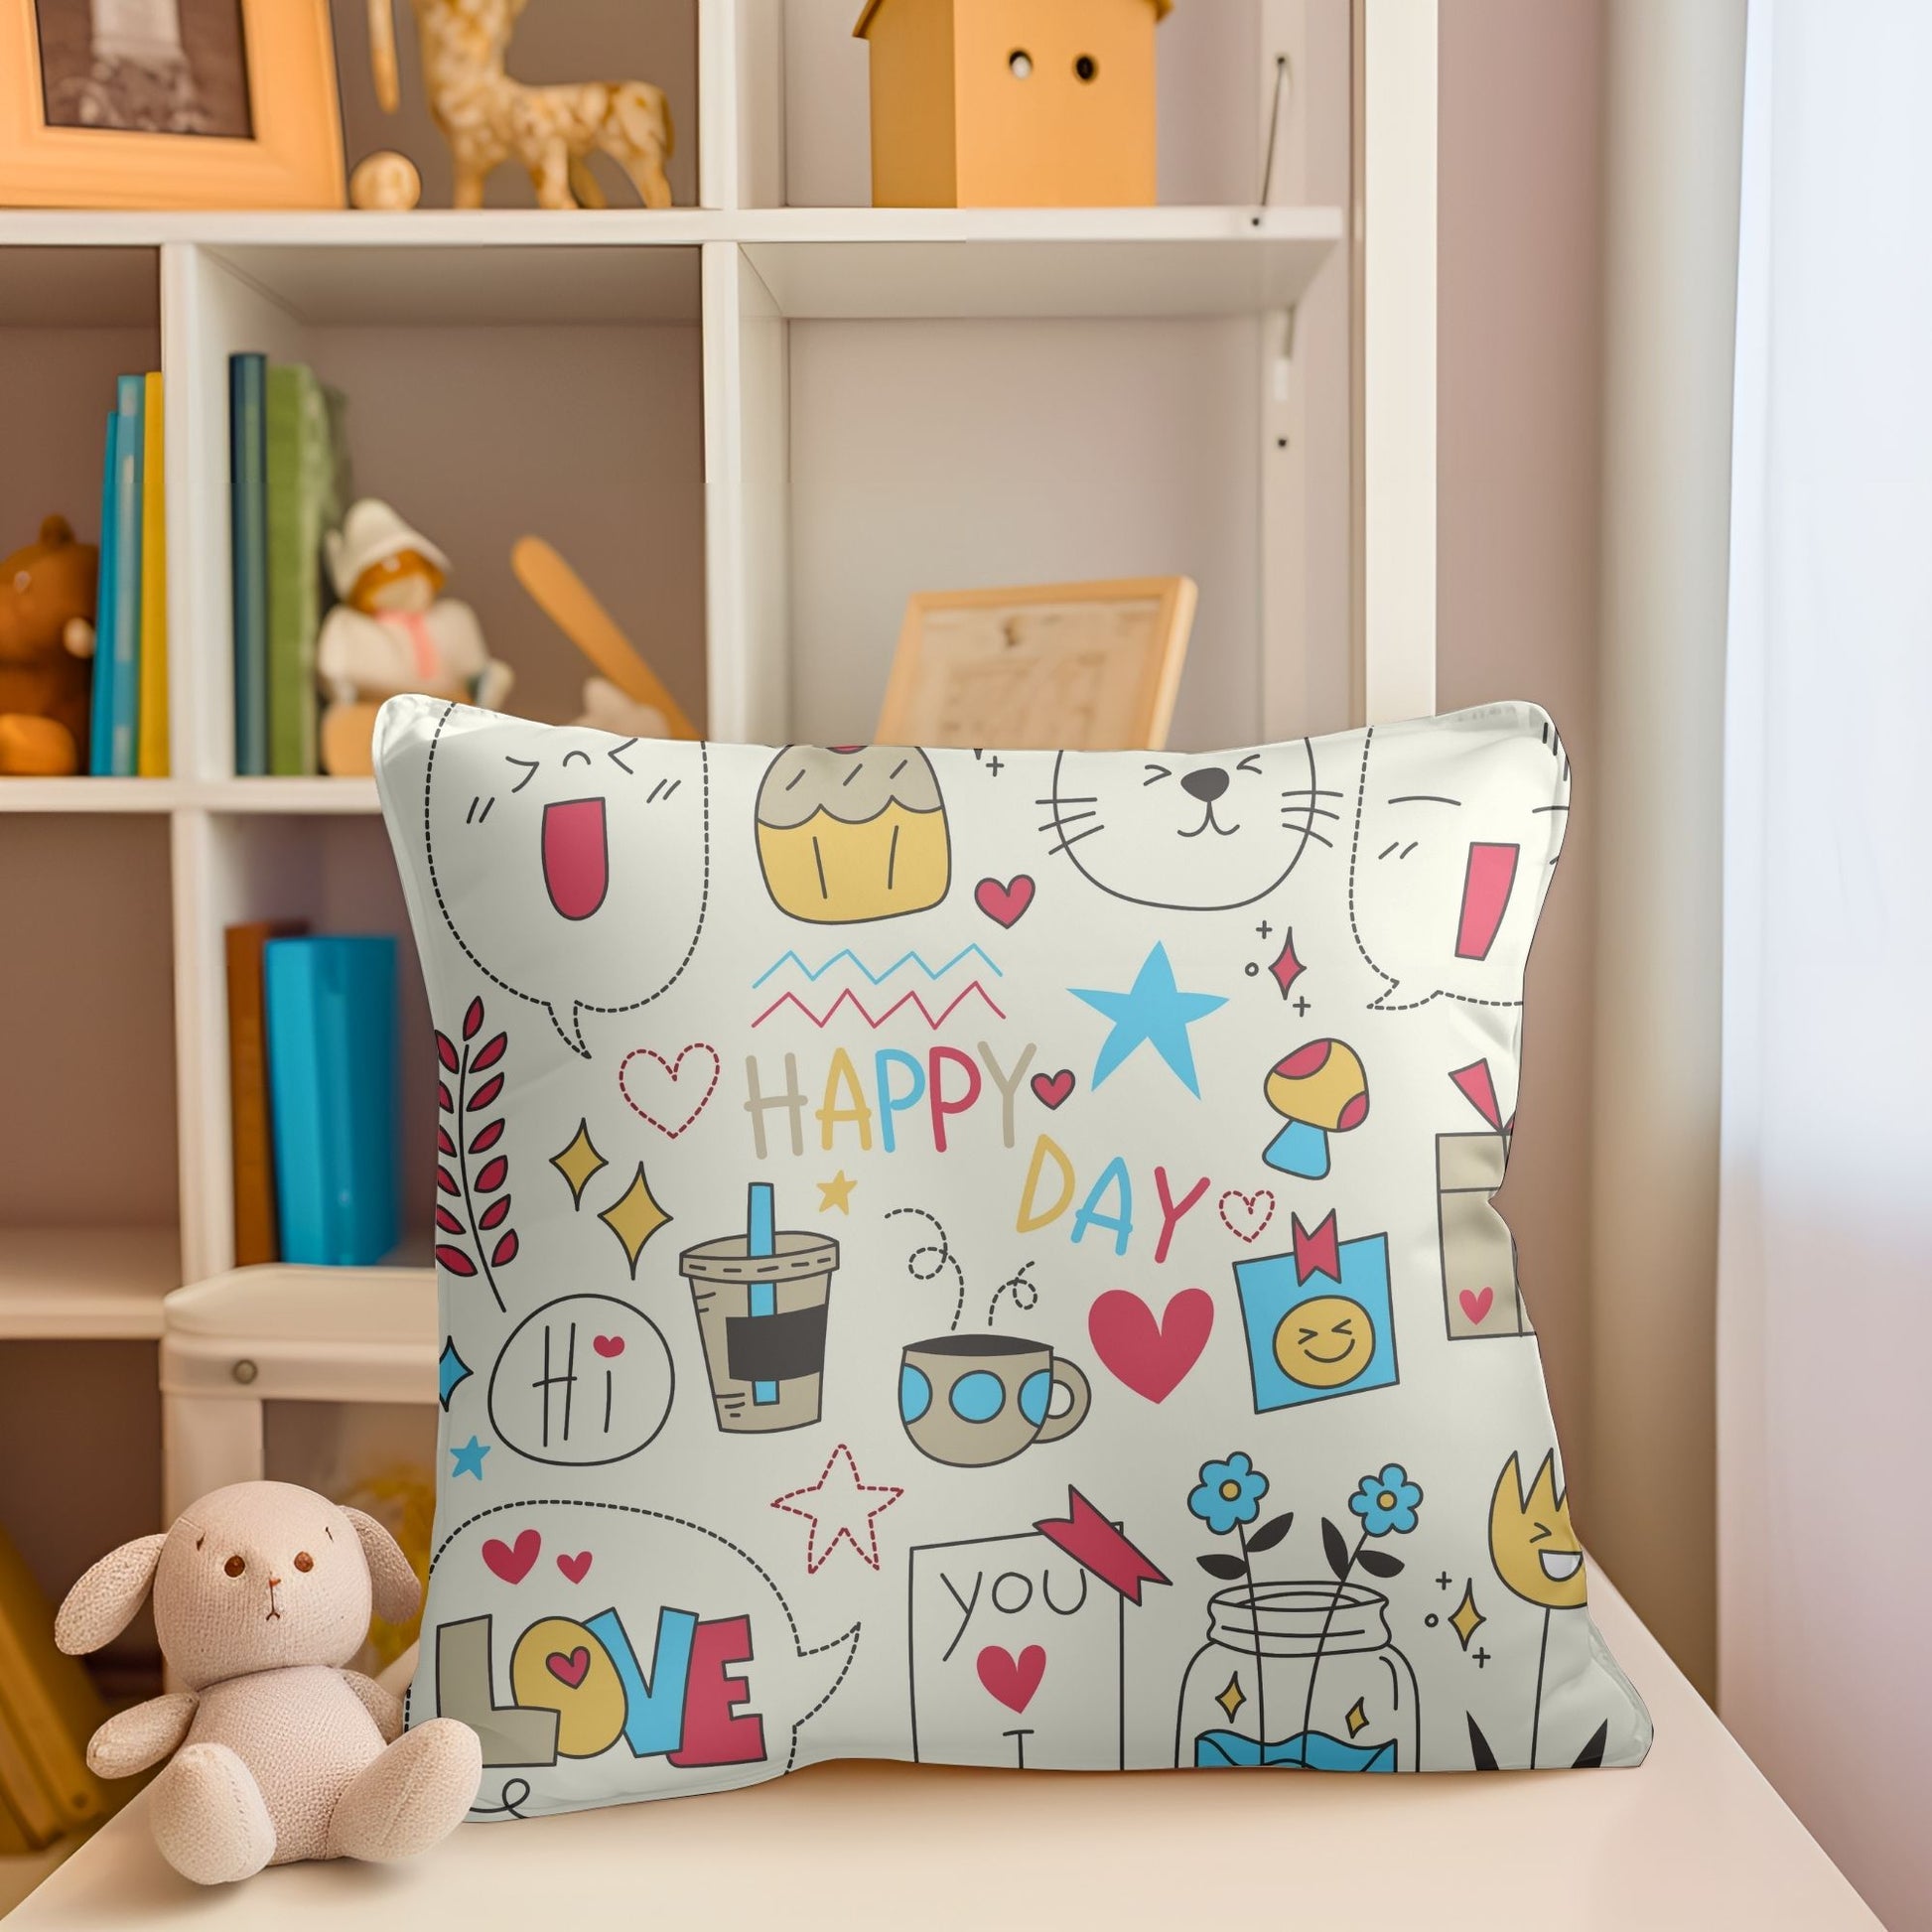 Adorable "Happy Day" patterned pillow to add a smile to kids' bedrooms.